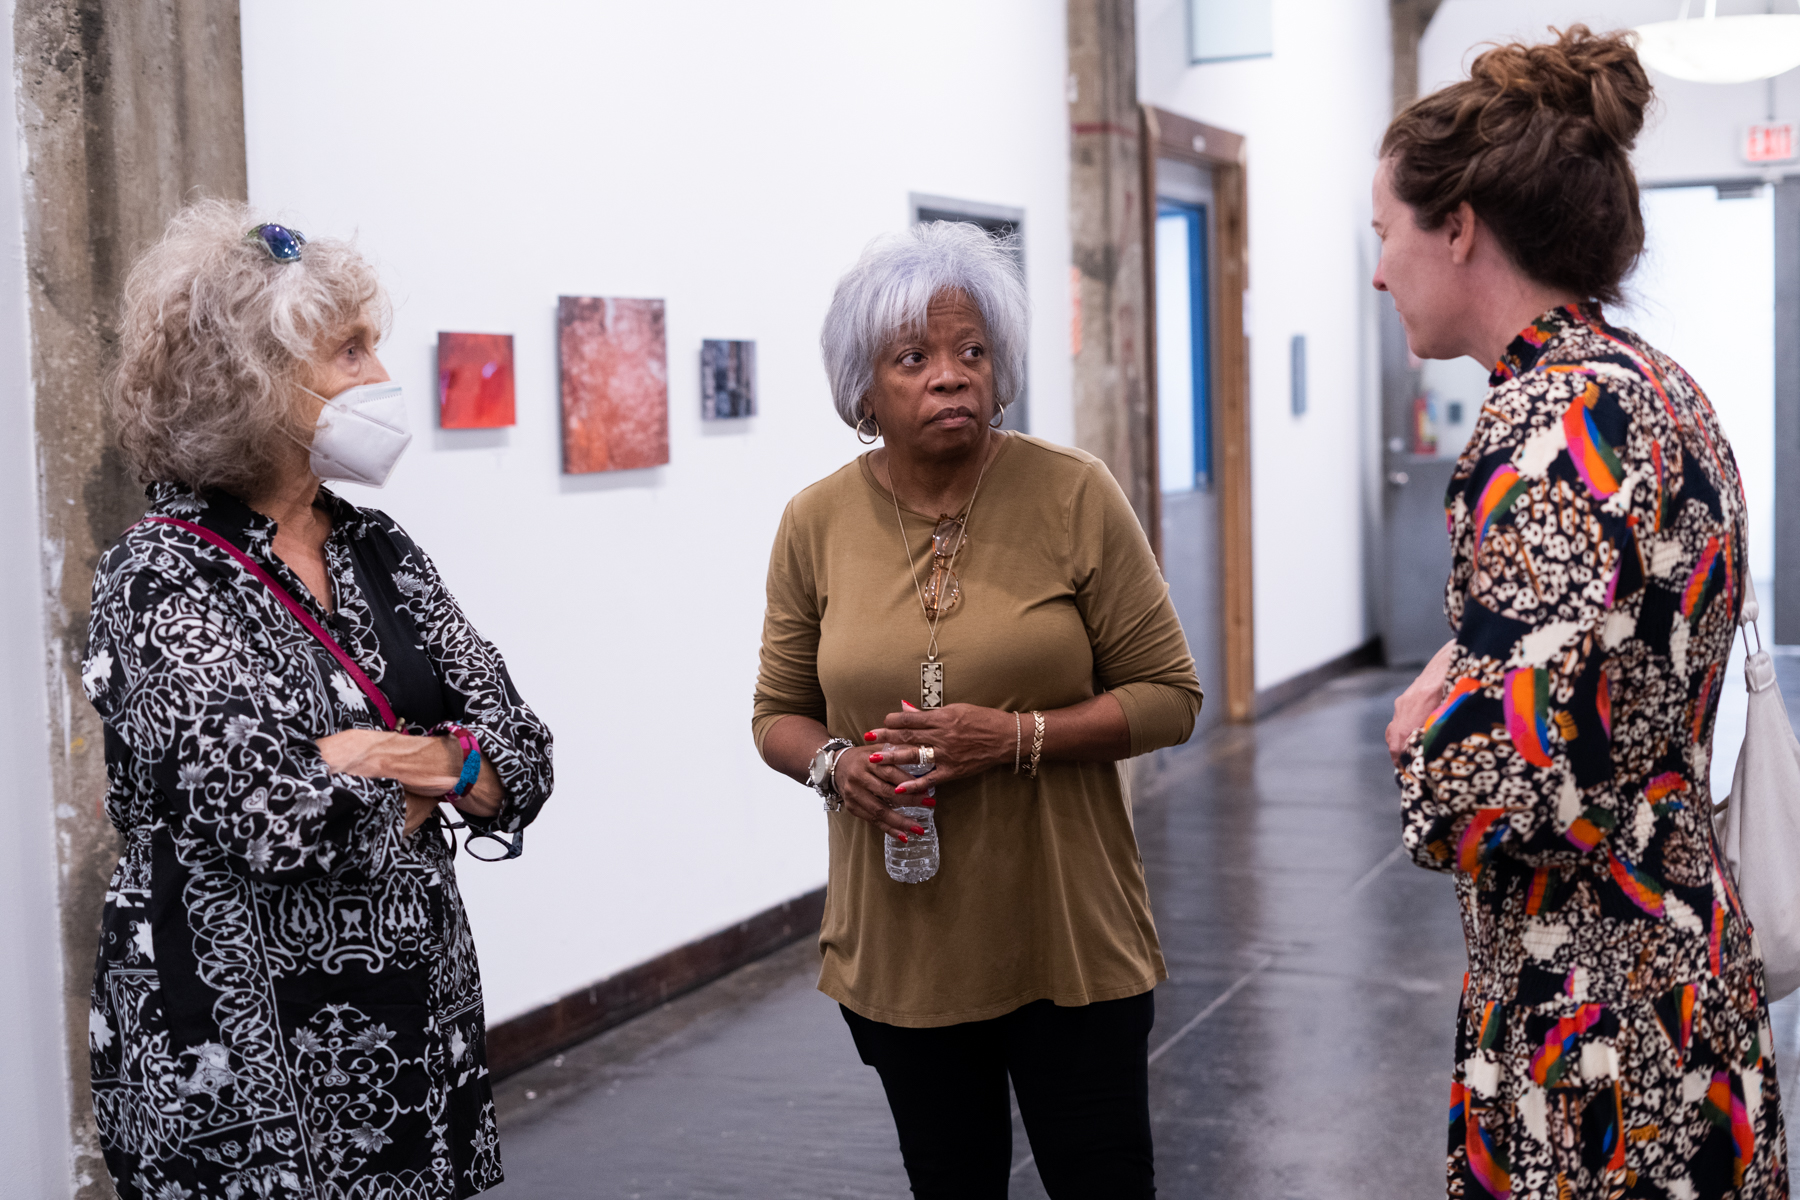 Image Description: Karen D. Bailey (in middle) talks with two others at the opening reception of "A Closer Look".